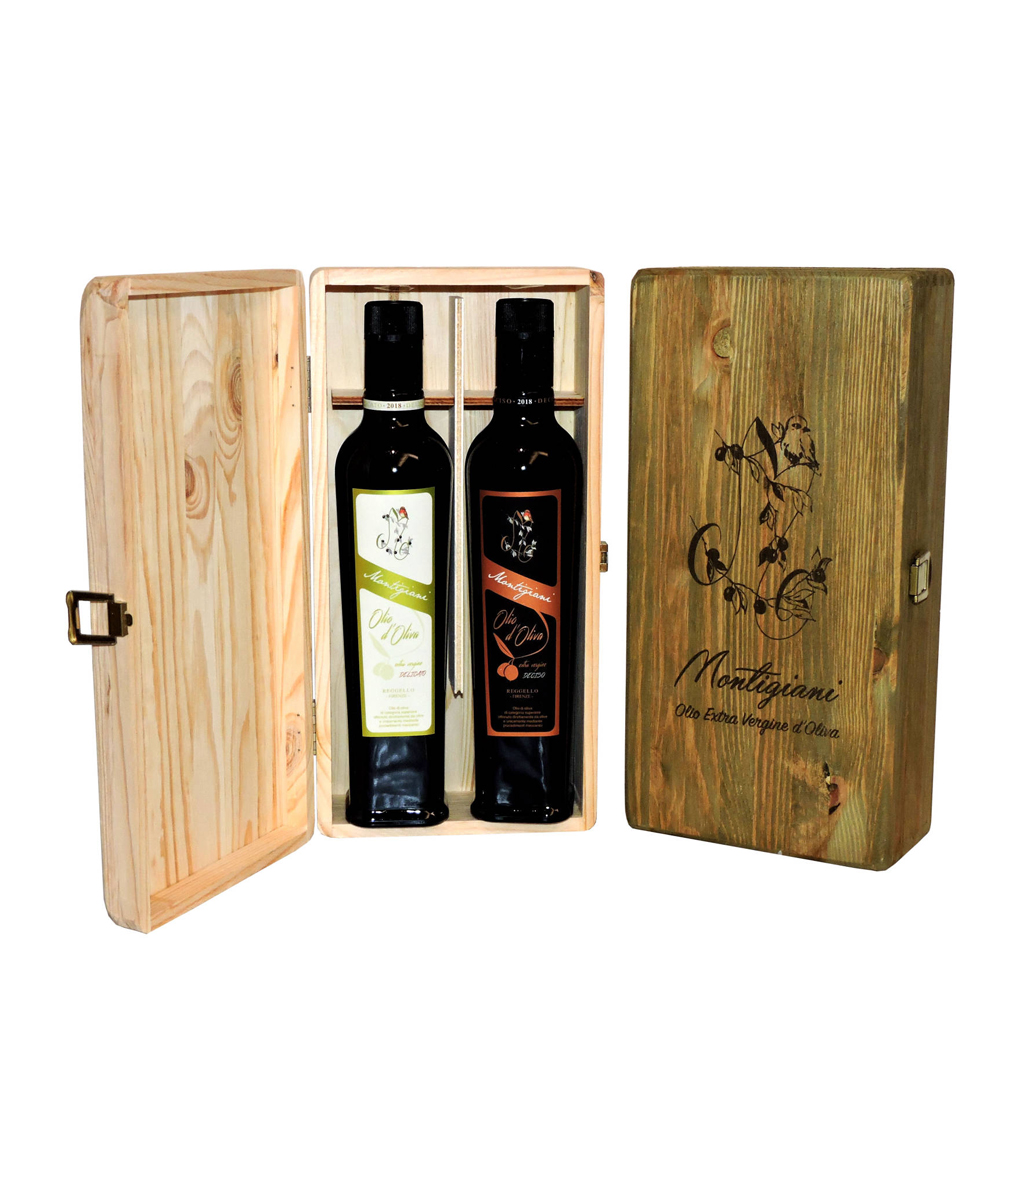 Extra Virgin Olive Oil in Wooden Gift Box